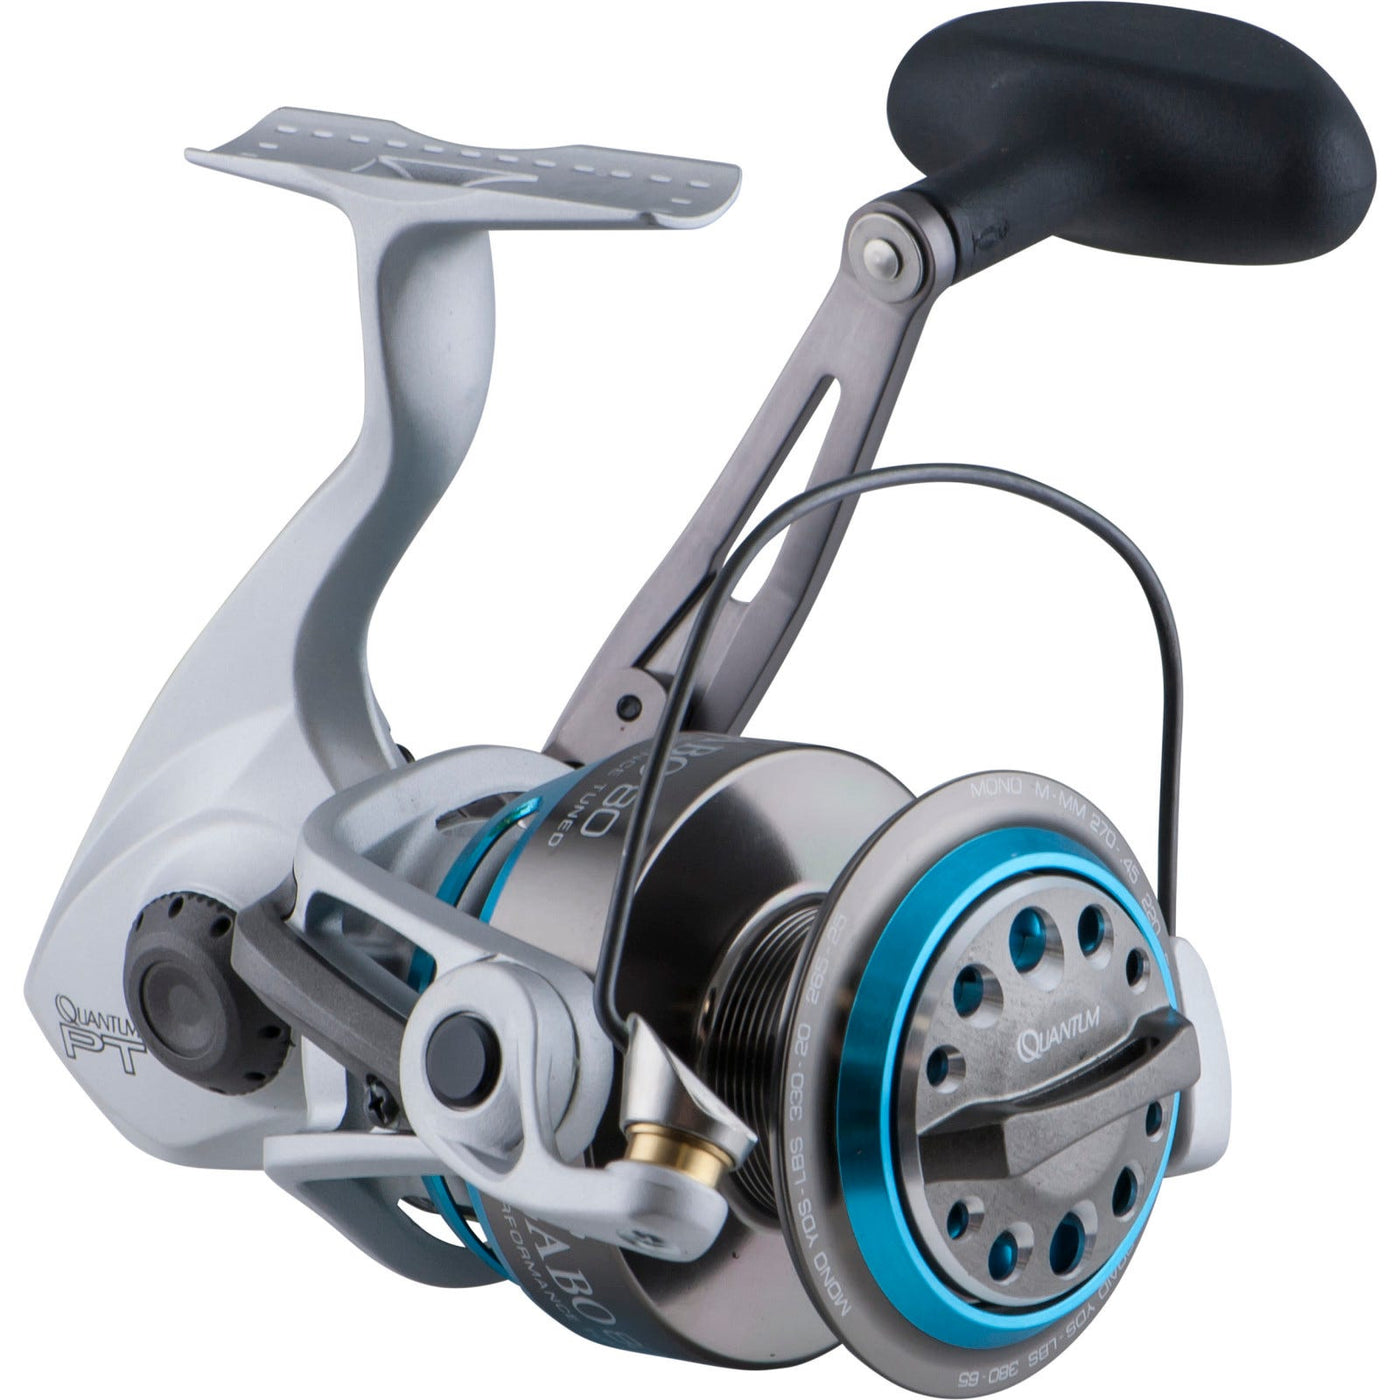 New 2013 Quantum Cabo PTs CSP80PTSD Spinning Reel ..Has some